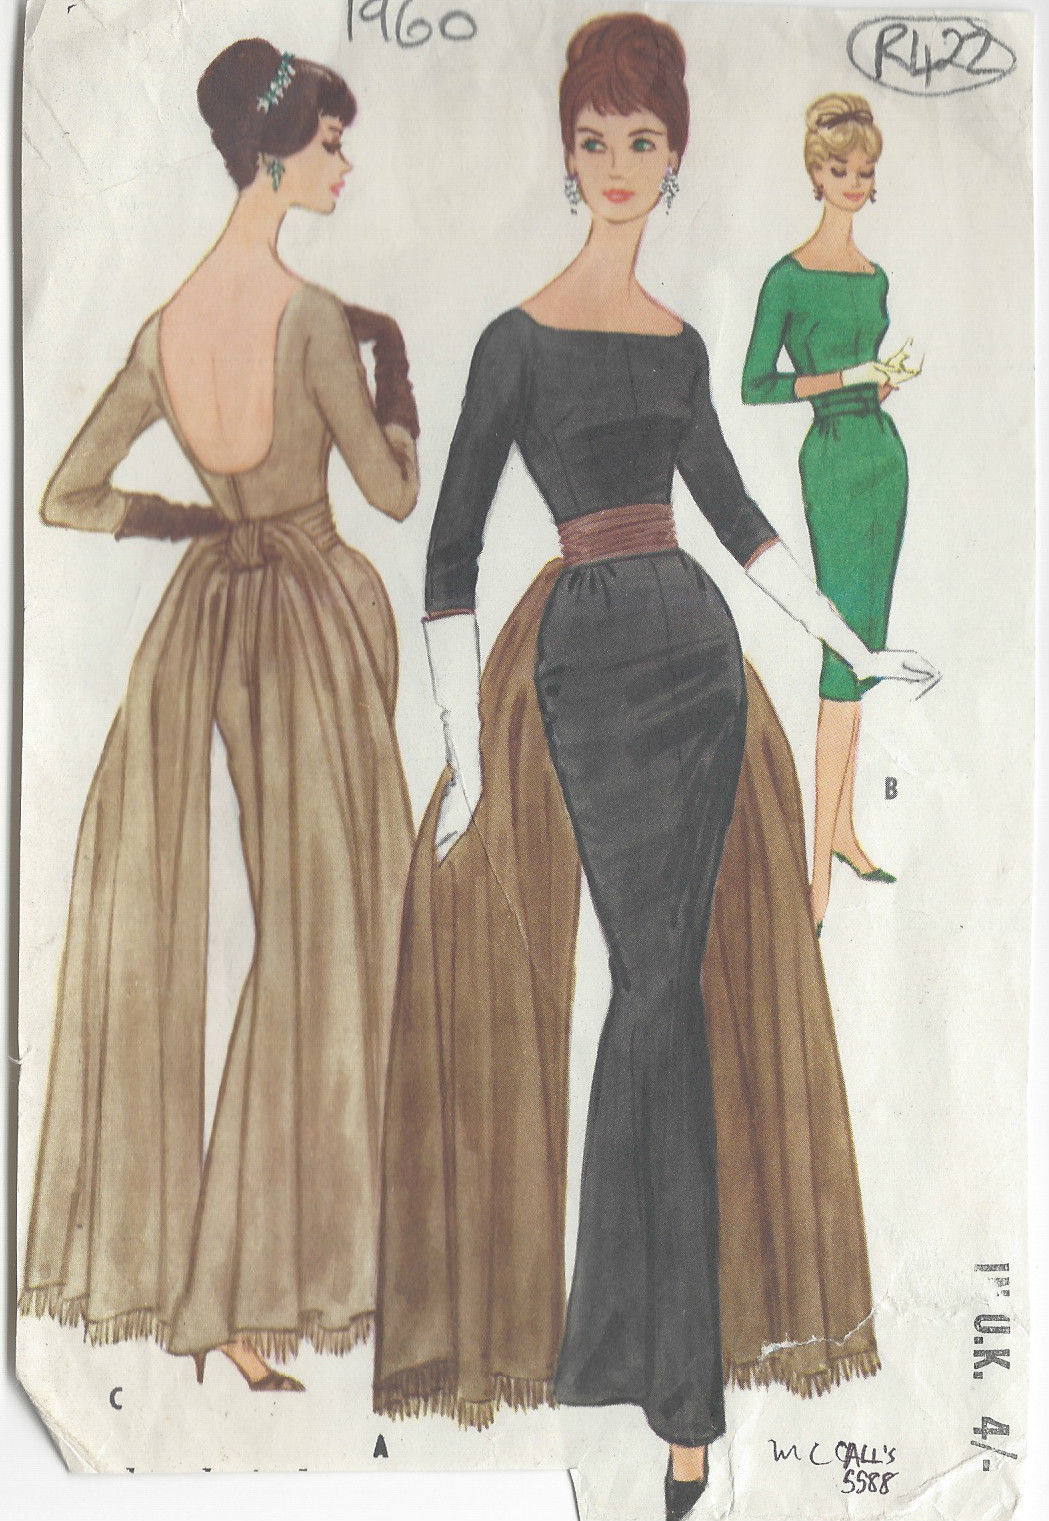 Grammys Vintage Goodys - Choose a favorite 1950-1960's dress for us ladies  to wear to church. | Facebook